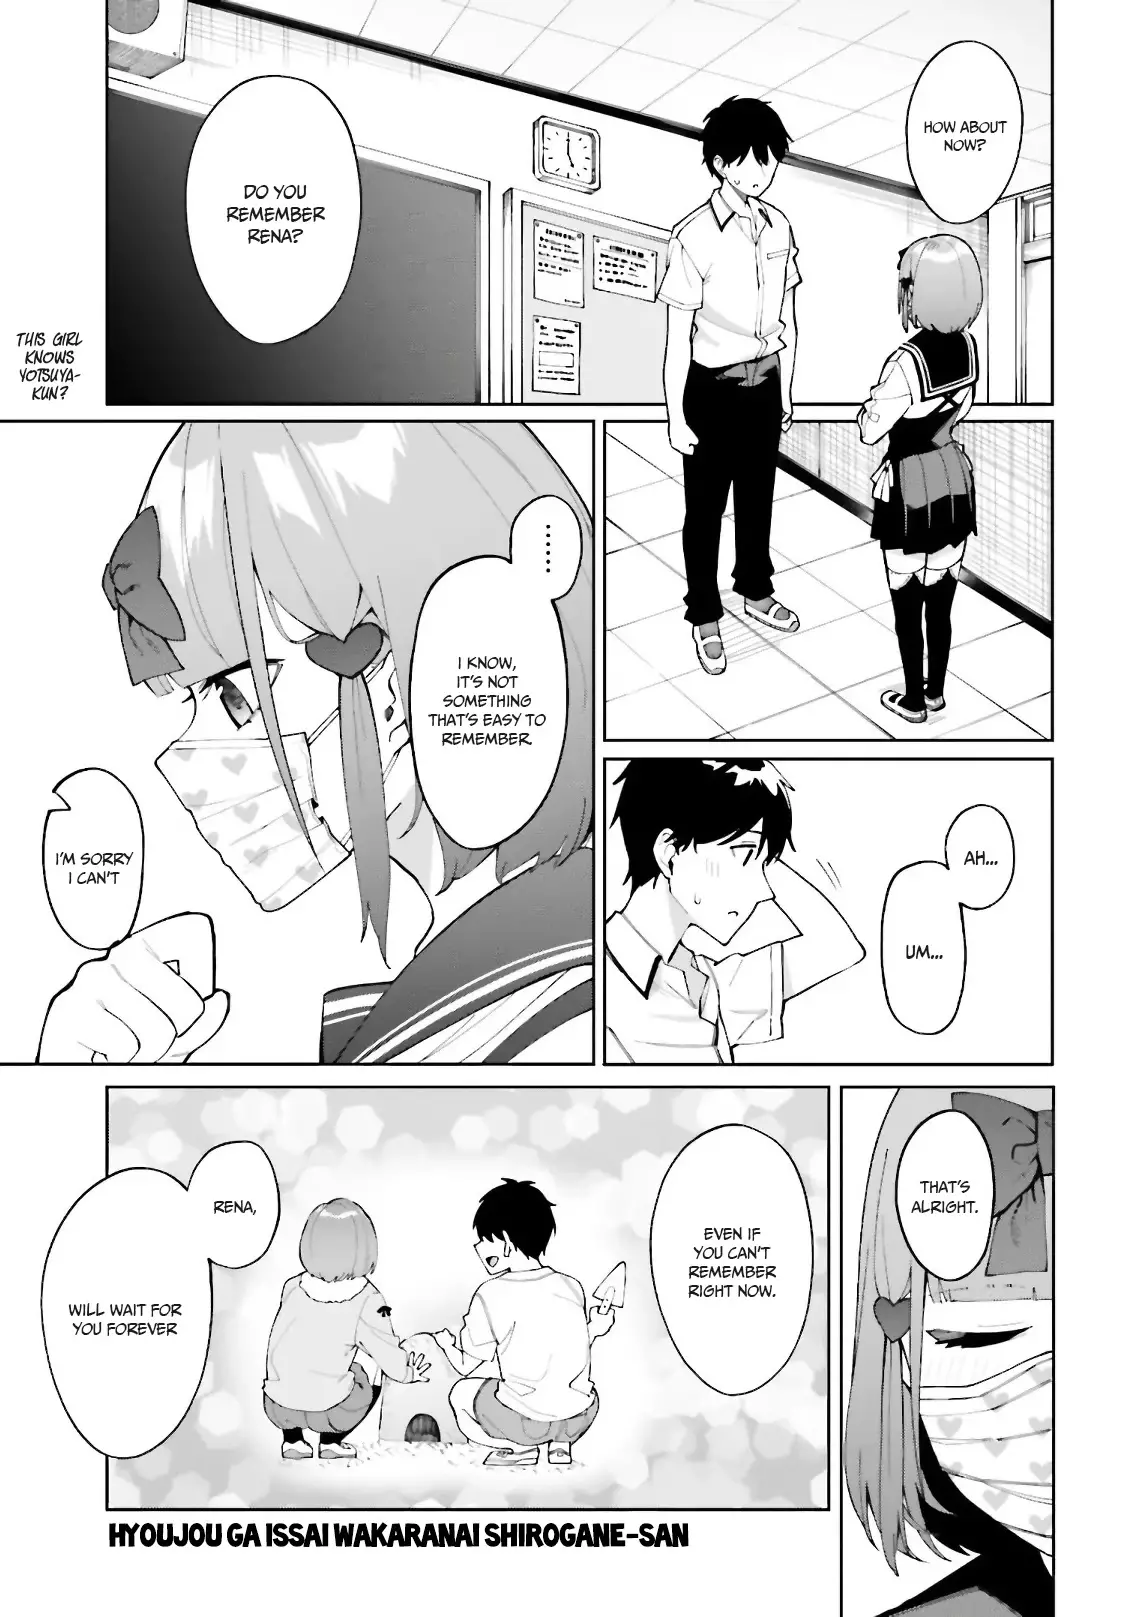 I Don't Understand Shirogane-San's Facial Expression At All - 7 page 2-dd15004a